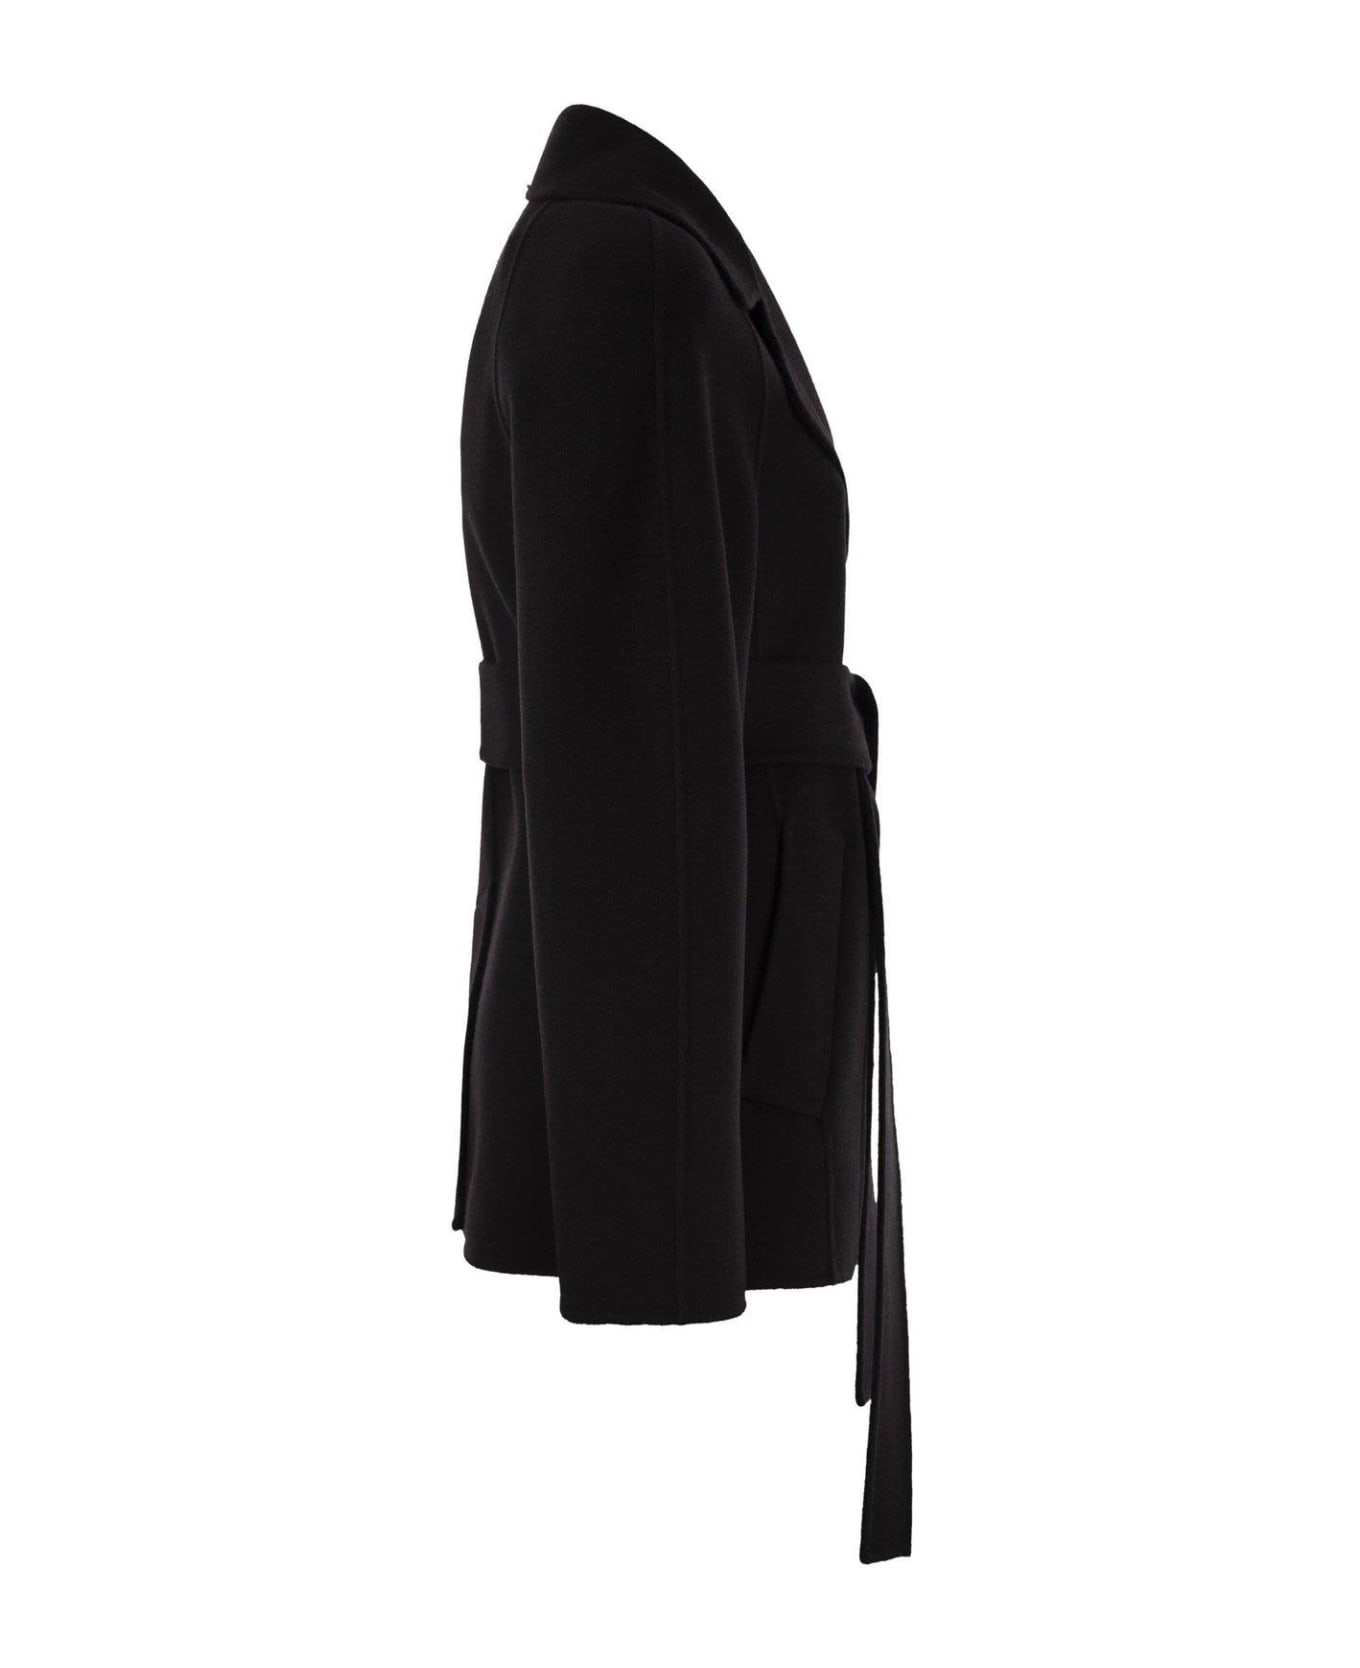 SportMax Double-breasted Belted Coat - Nero